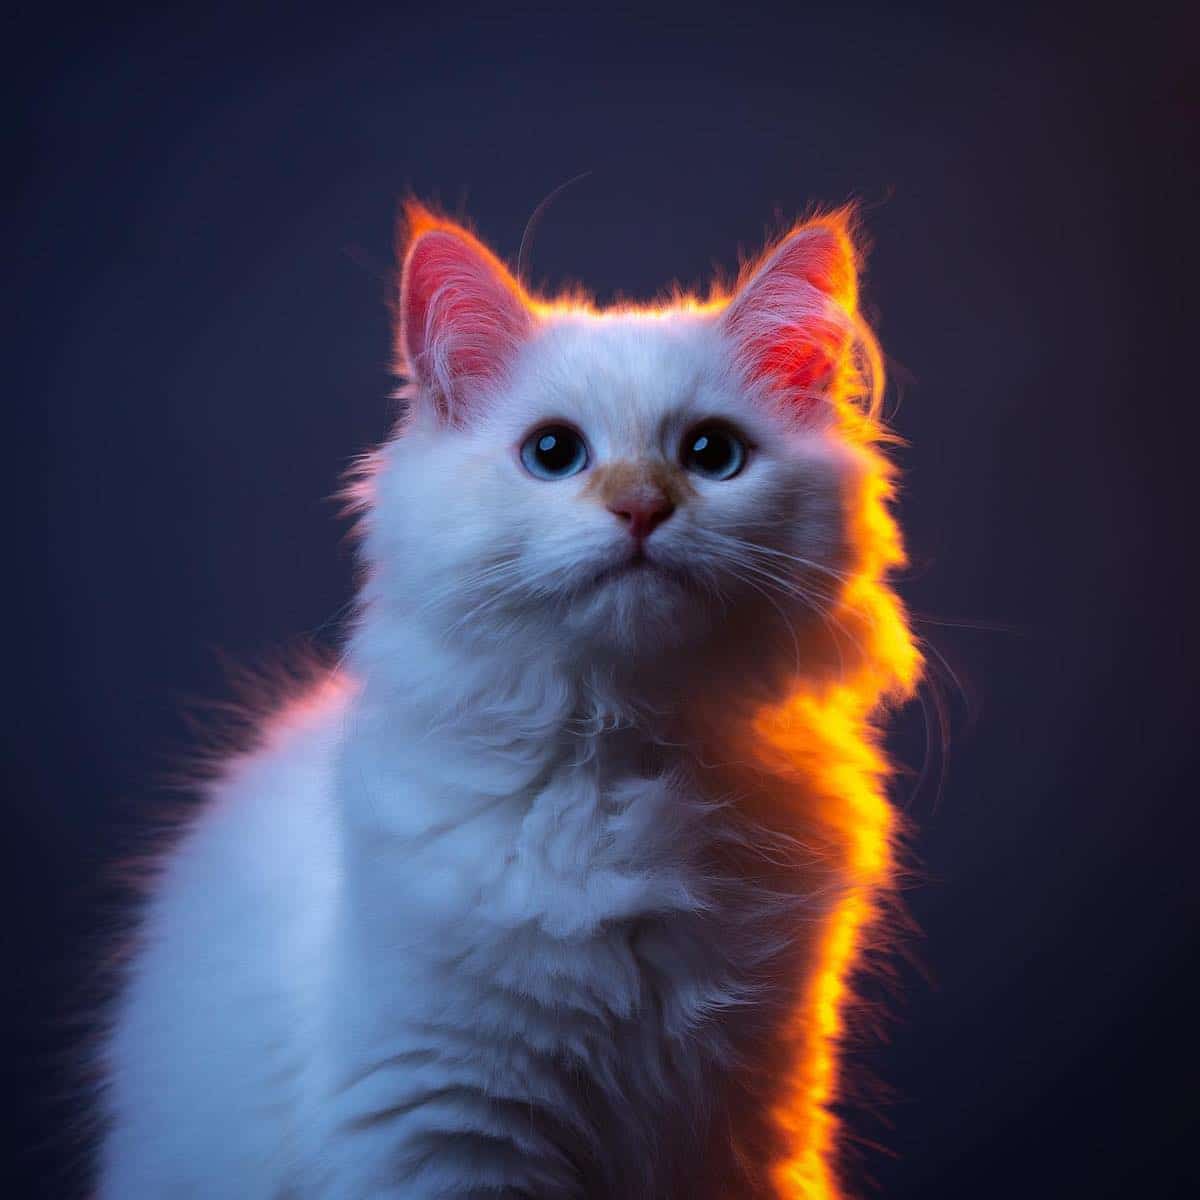 Cat Photography by Nils Jacobi